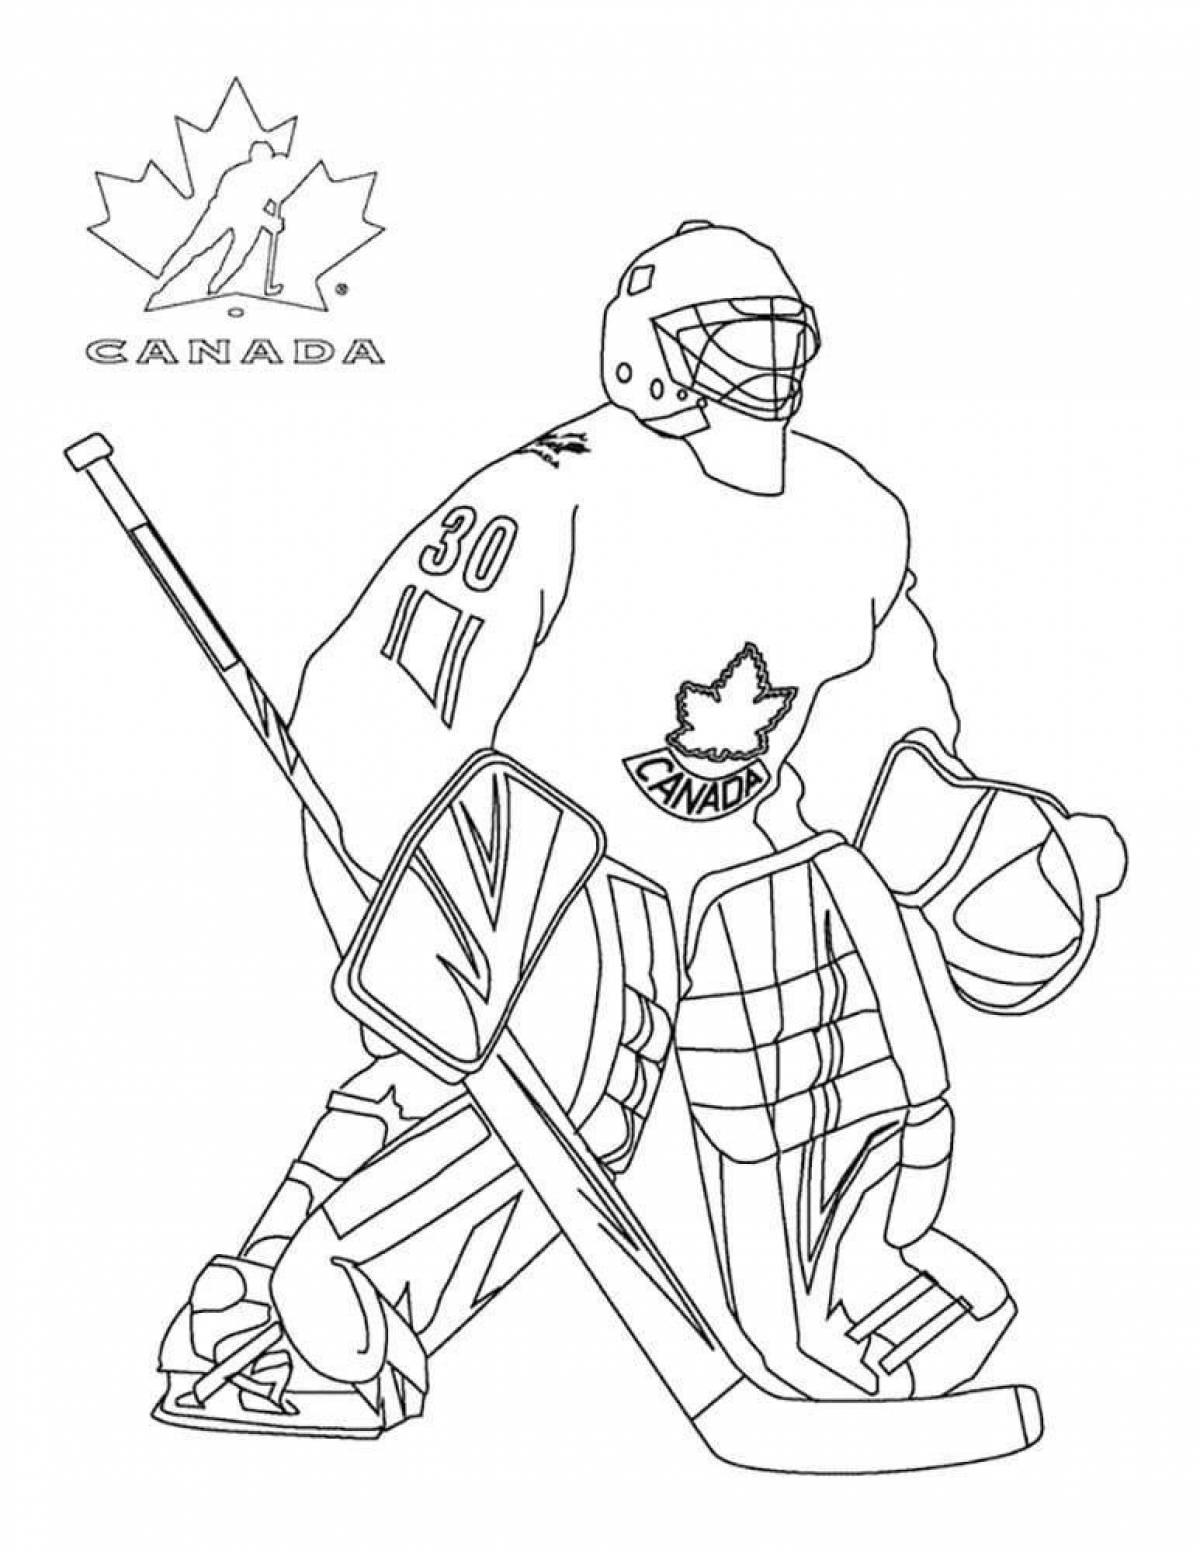 A fun hockey coloring book for kids